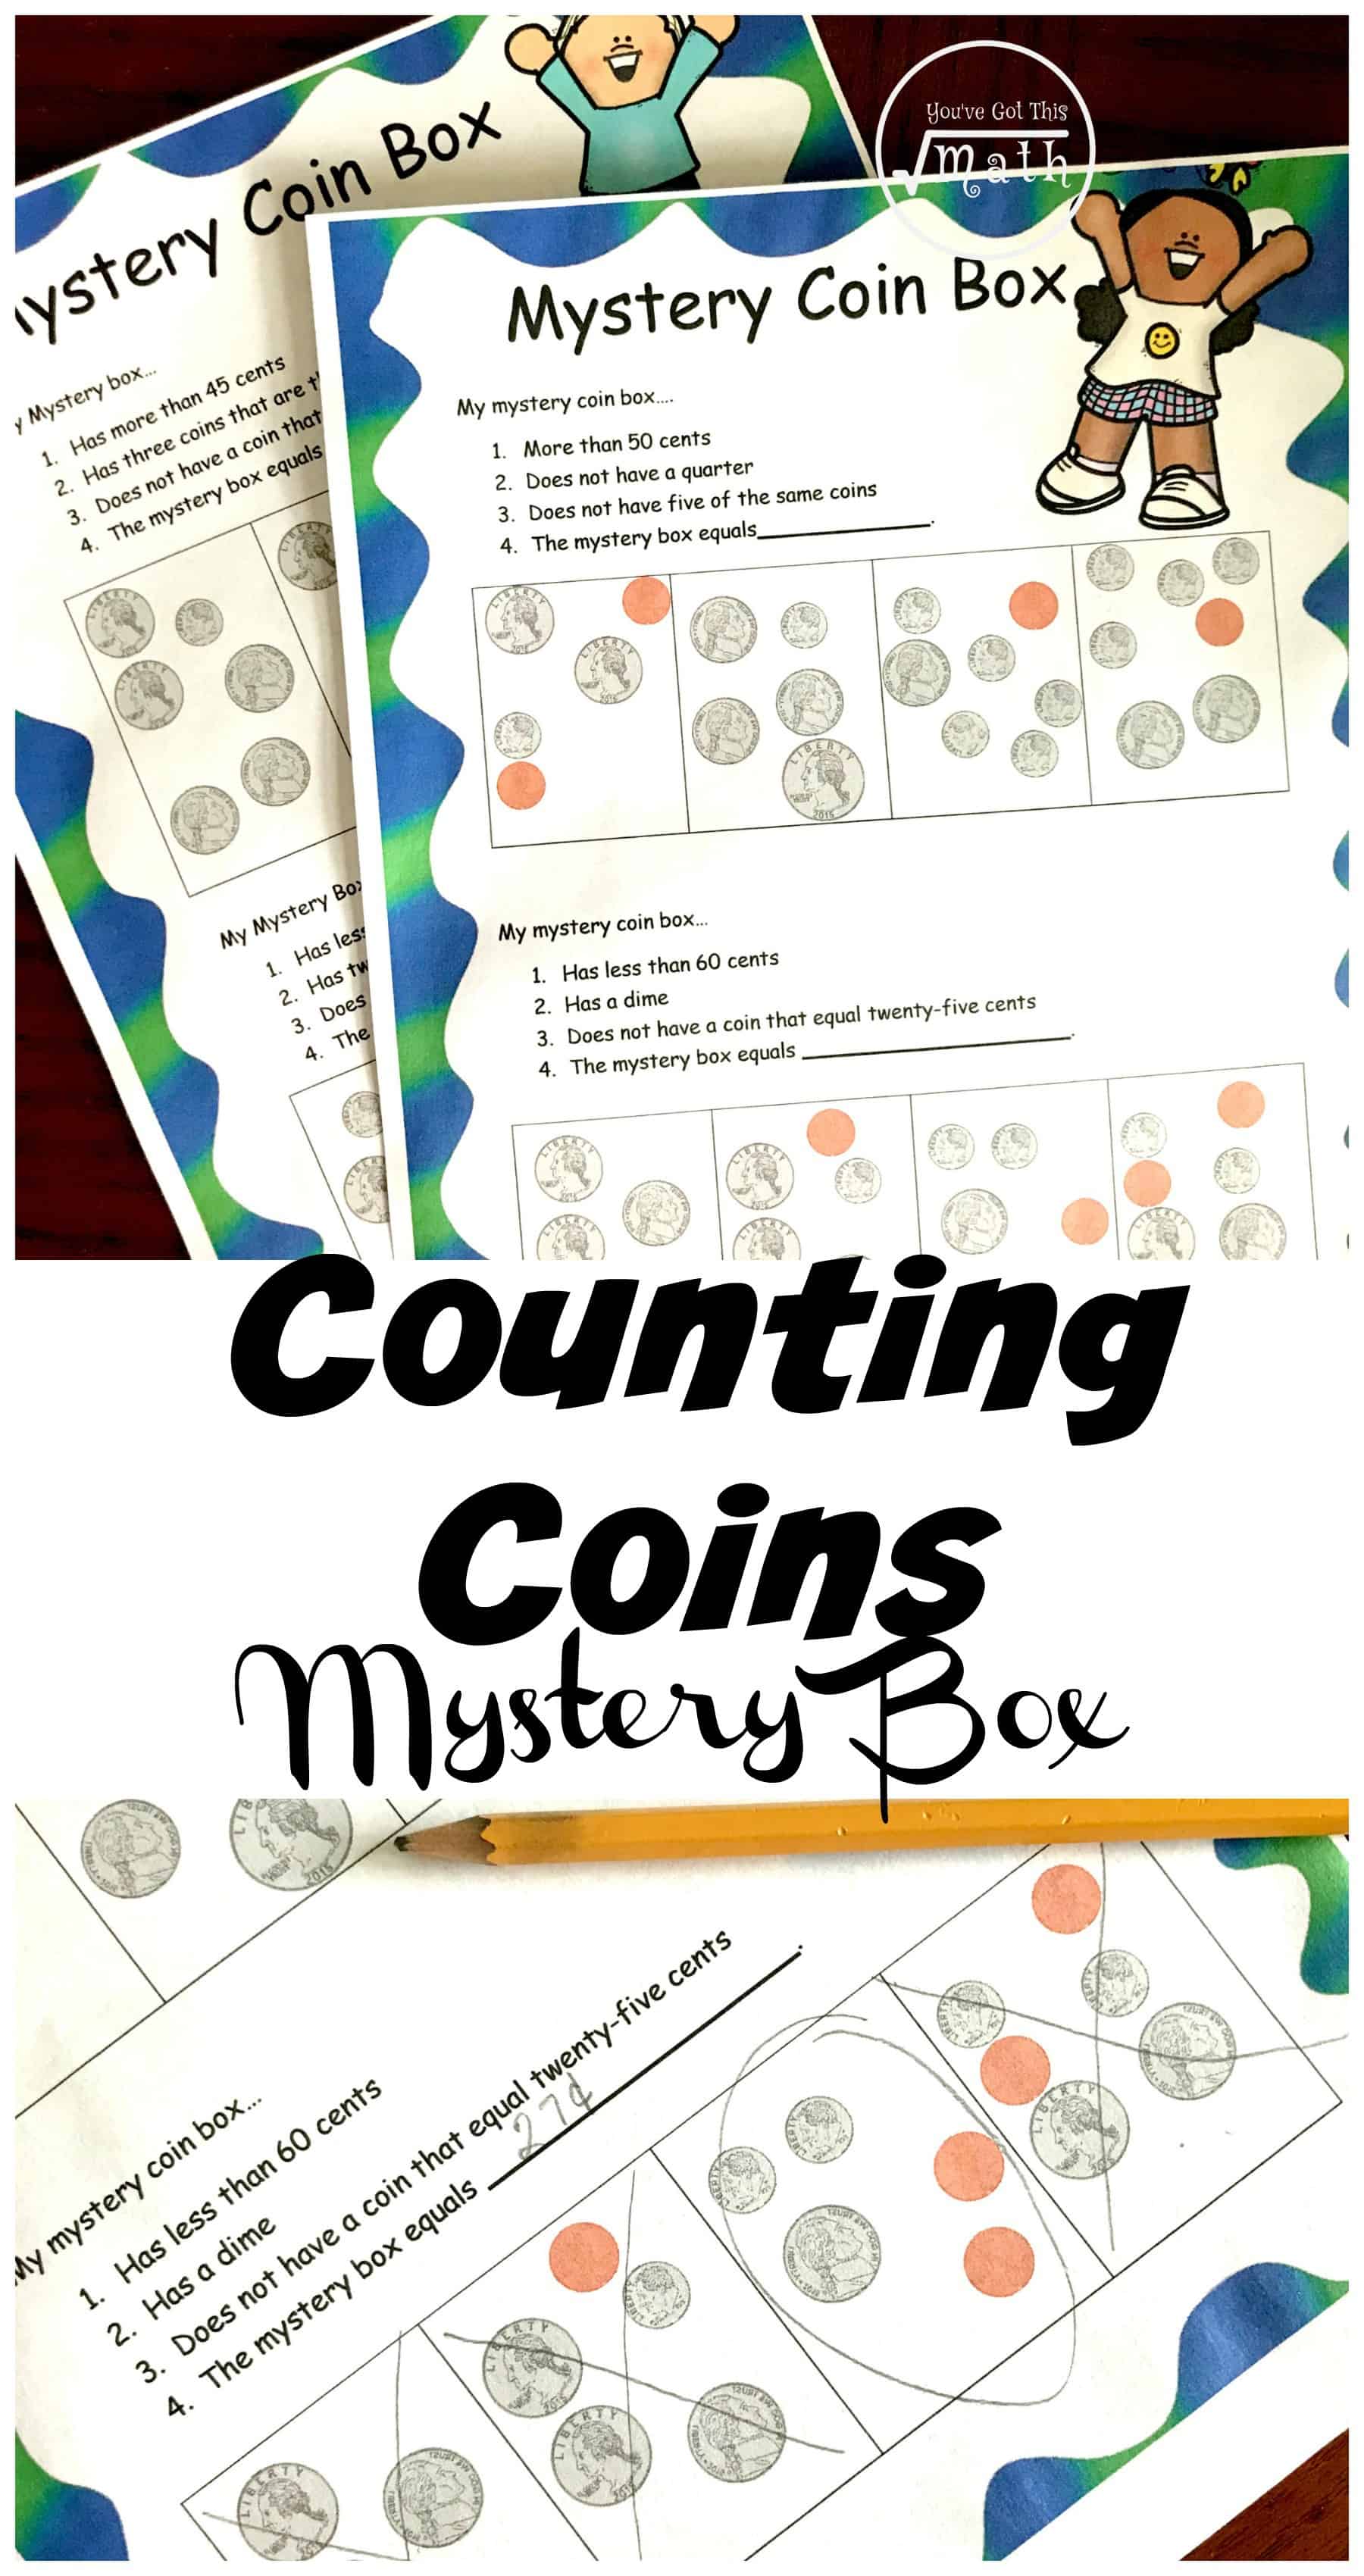 These counting coin worksheets have a fun twist. Children have to use clues to figure out which box is the mystery box. These clues include coin recognition and counting money.